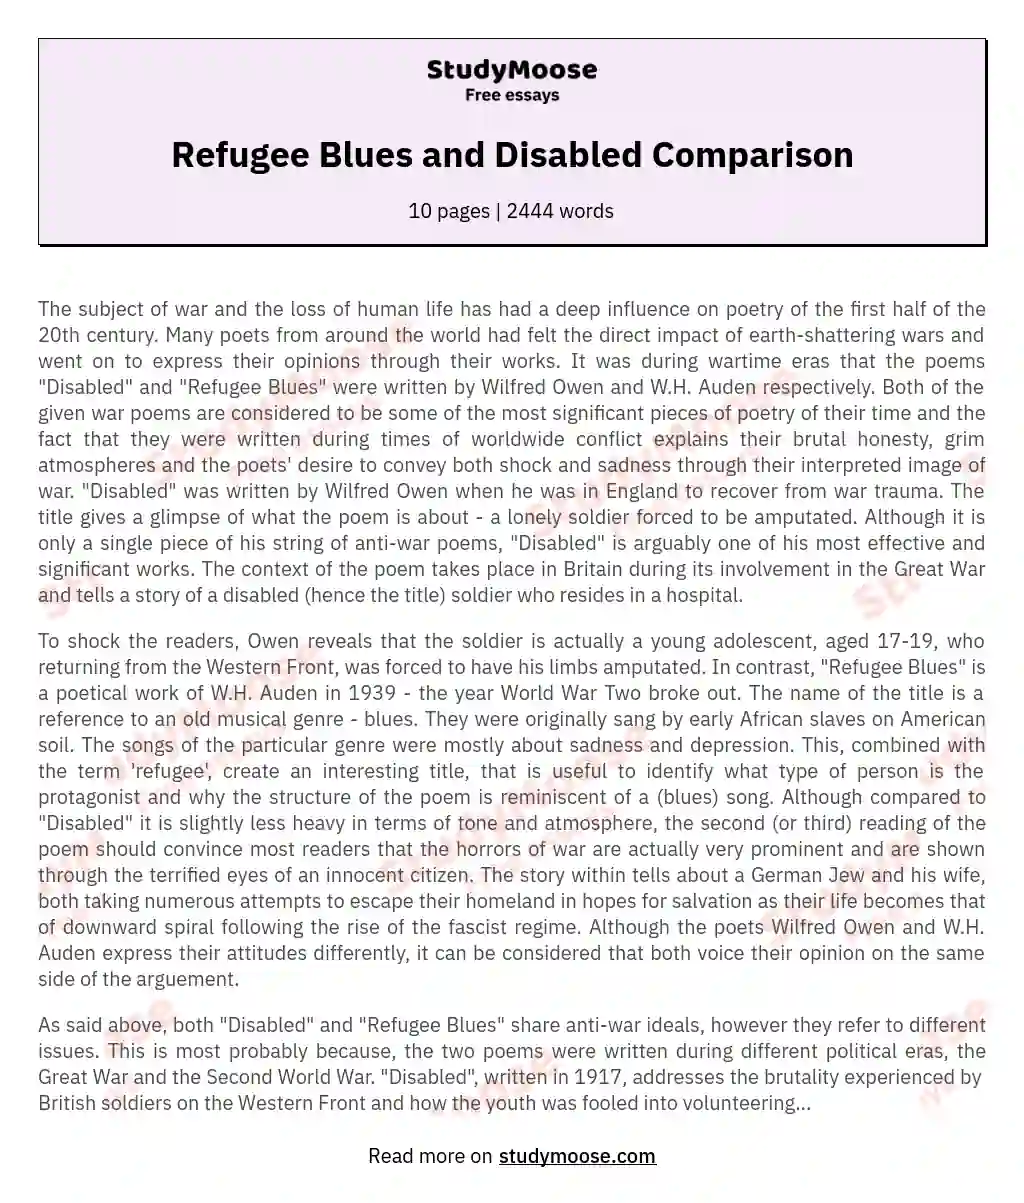 Refugee Blues and Disabled Comparison essay